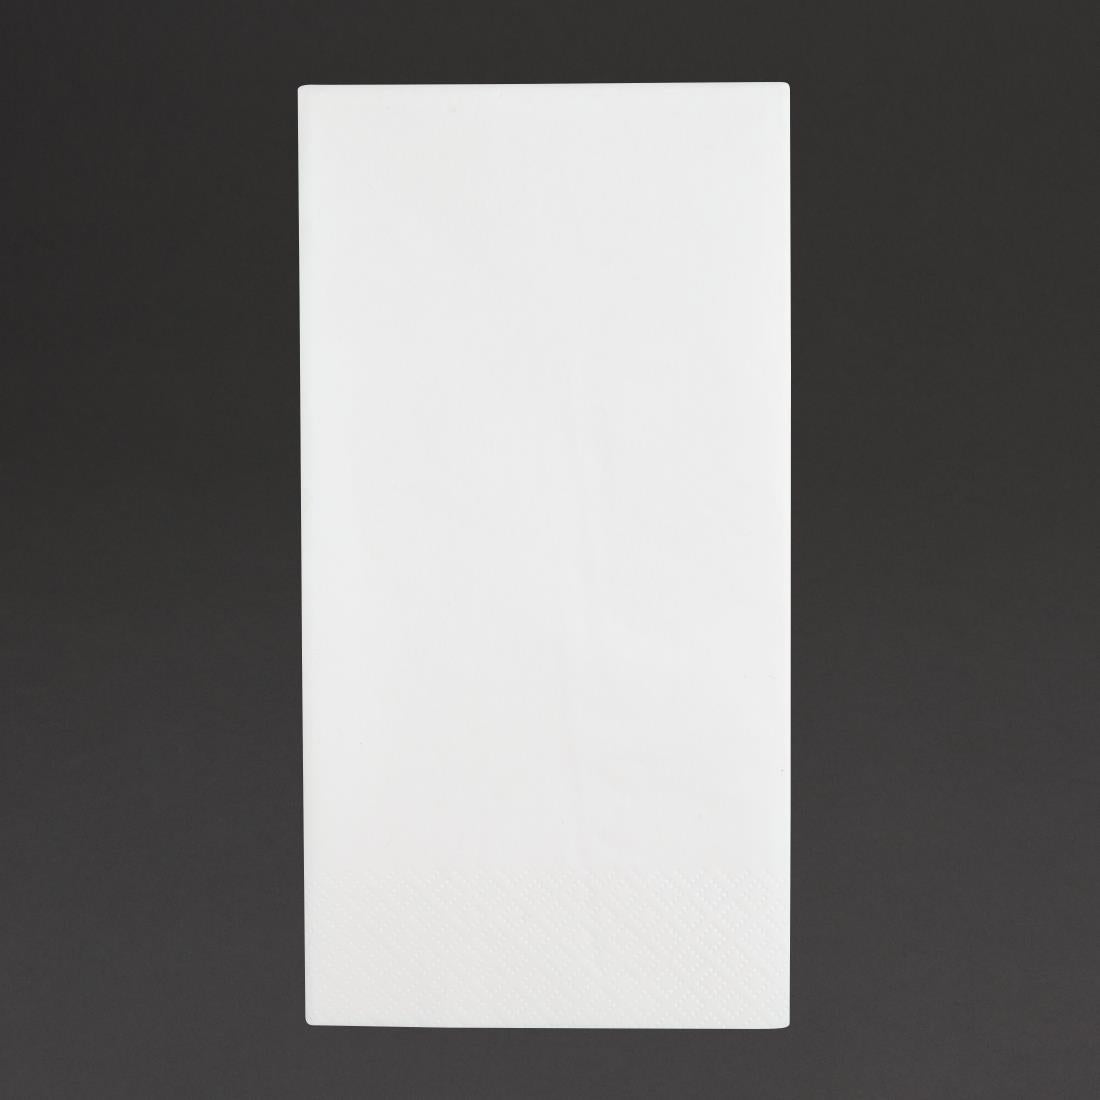 FE258 Fiesta Recyclable Dinner Napkin White 40x40cm 3ply 1/8 Fold (Pack of 1000) JD Catering Equipment Solutions Ltd